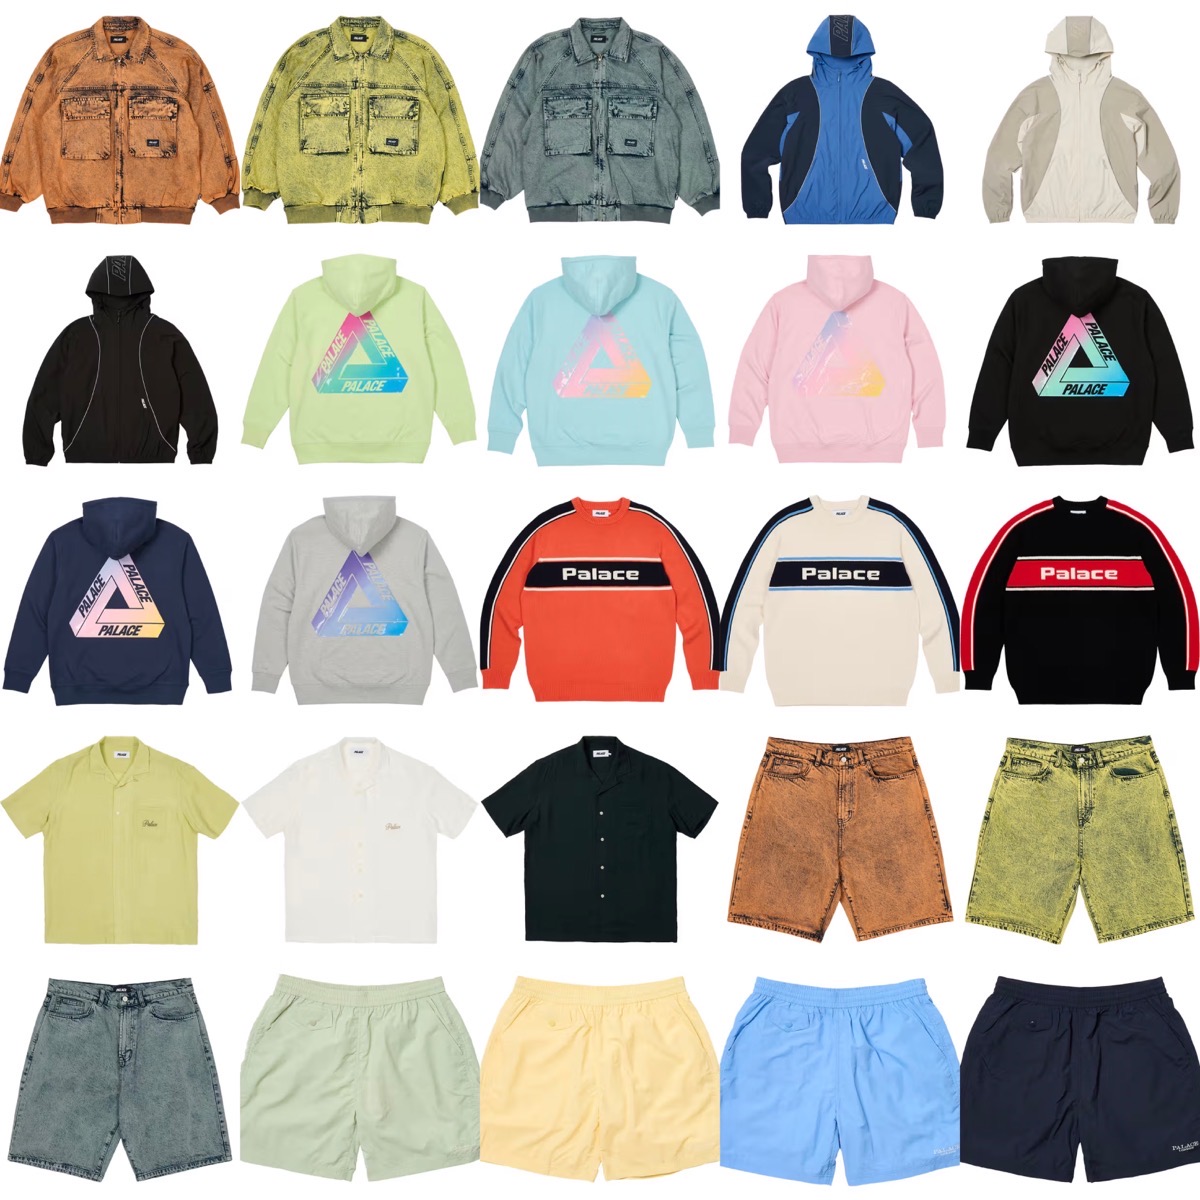 PALACE “SUMMER 23” Week3が国内5月20日に発売予定 UP TO DATE